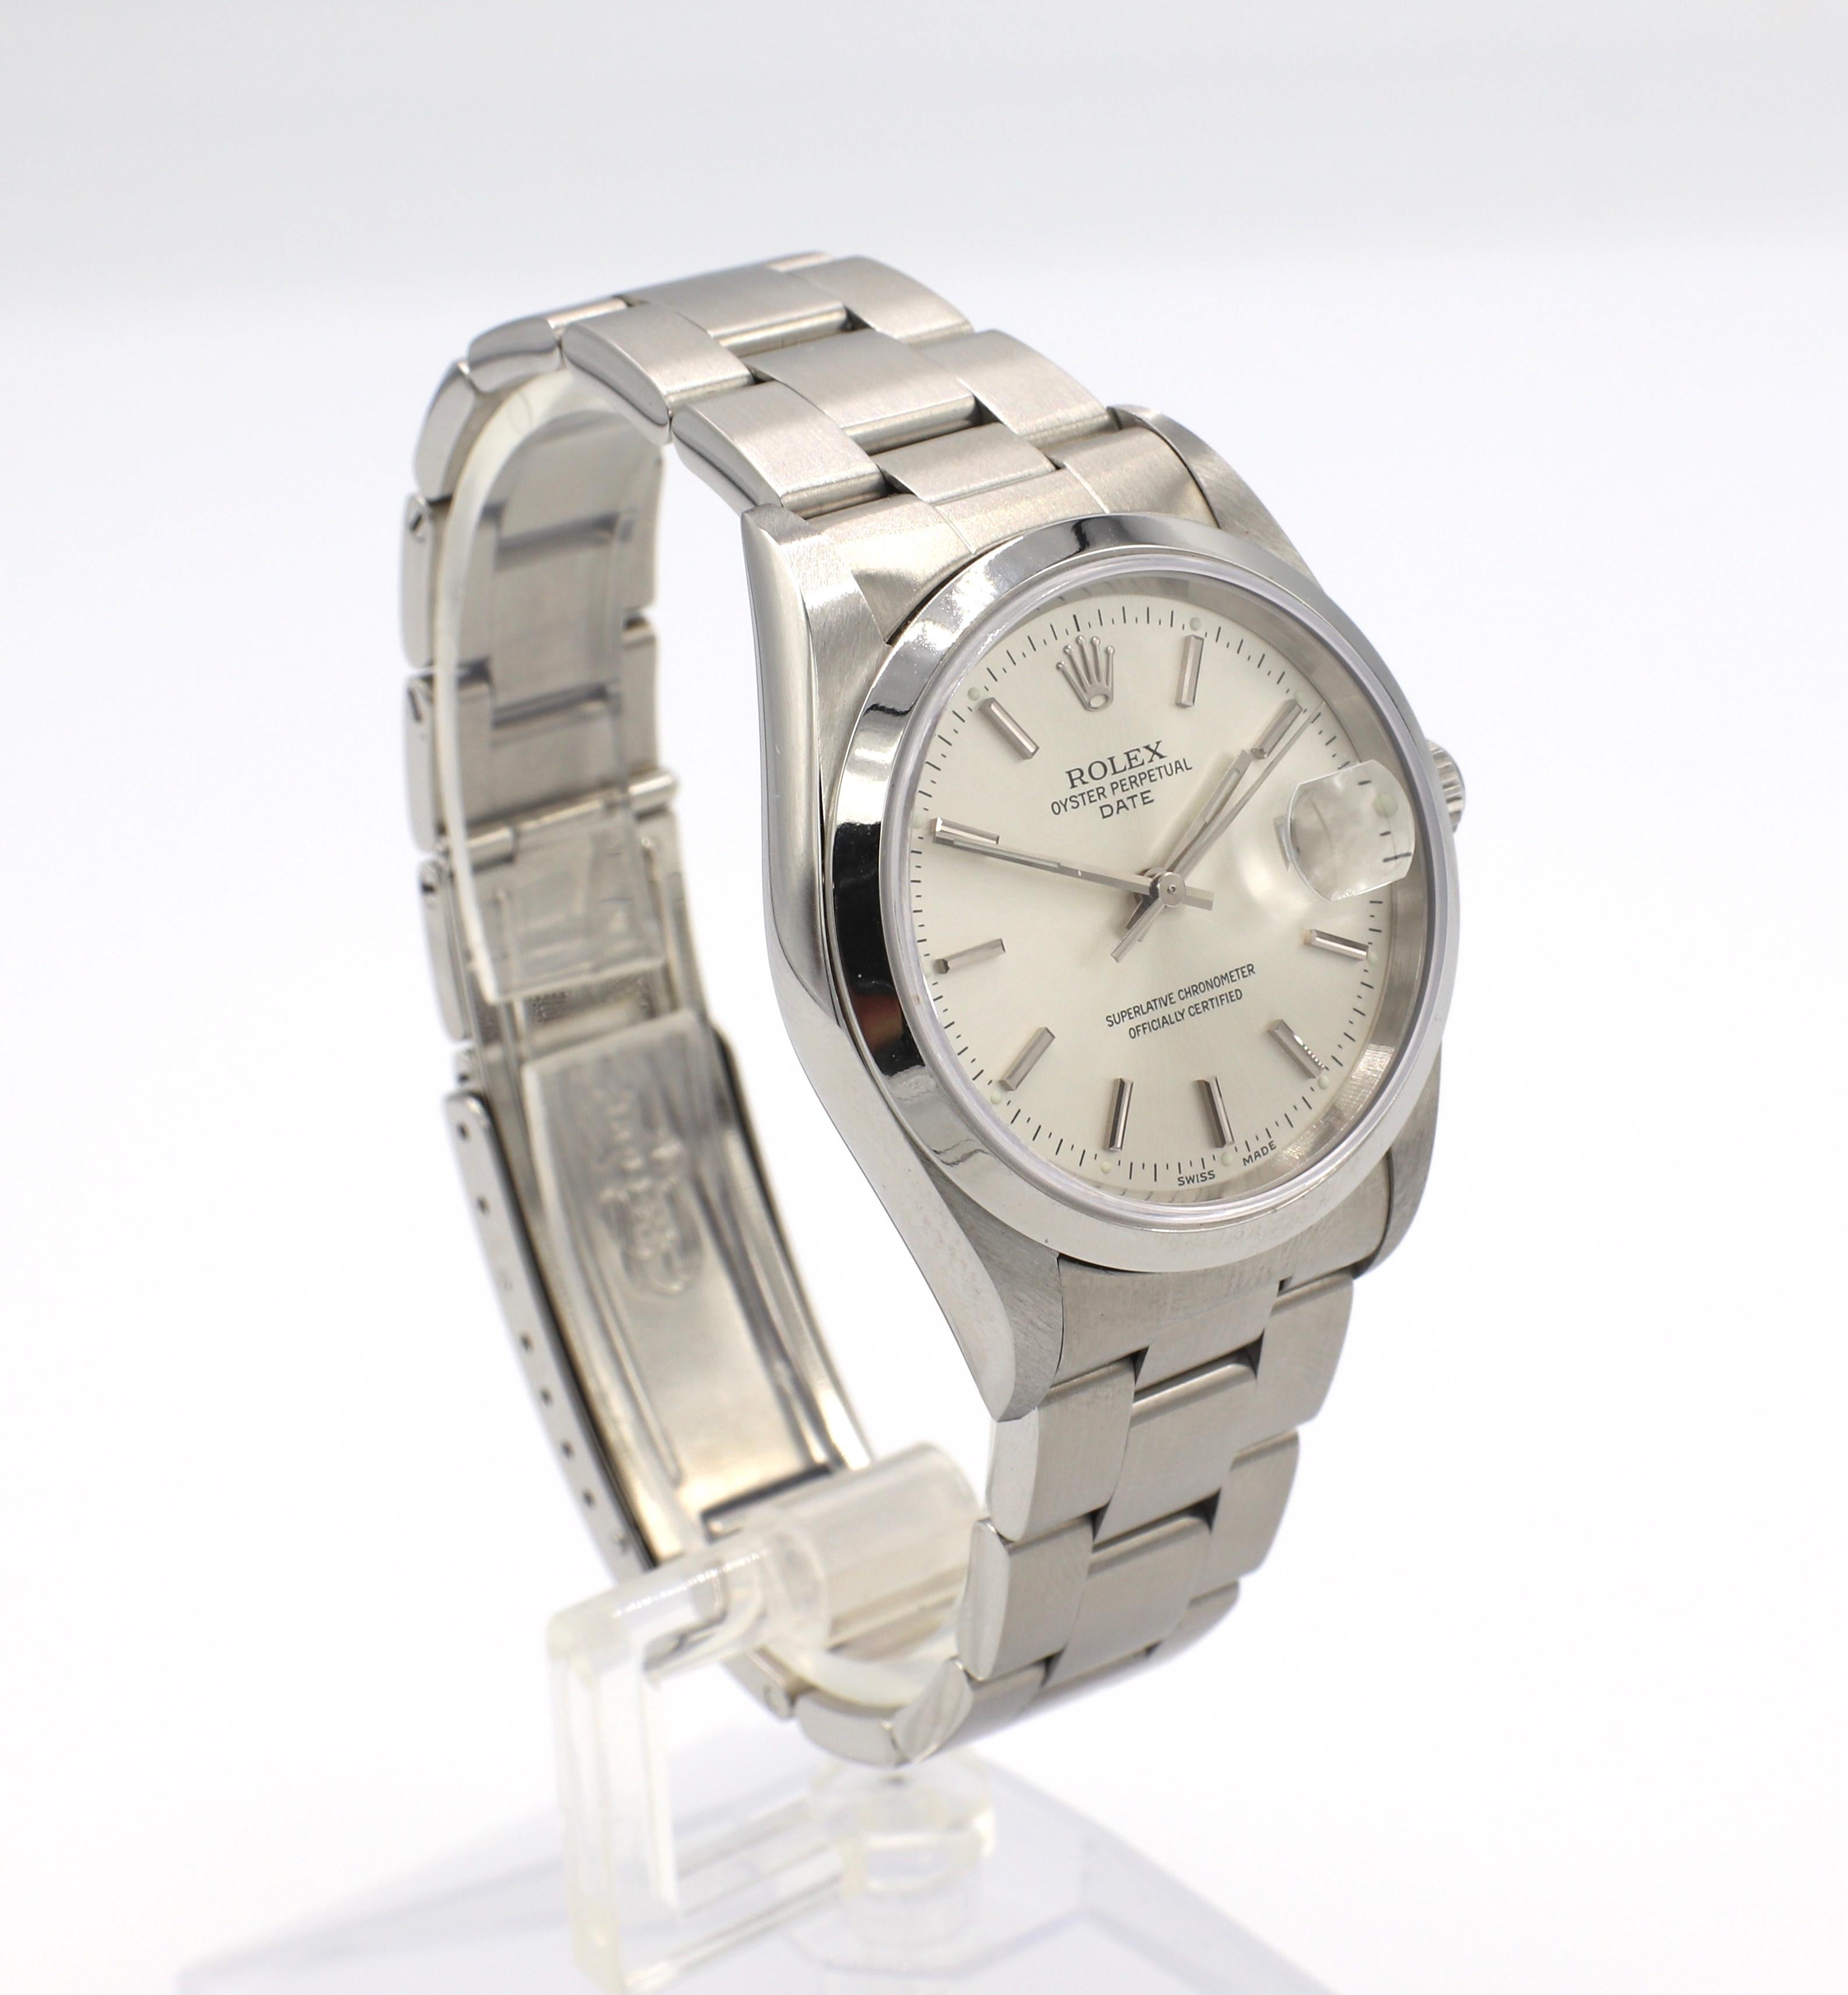 Vintage Rolex Oyster Perpetual Date Steel Watch Reference 15200 Box & Papers

Model: 15200
Serial: W815***
Metal: Stainless steel
Case diameter: 34mm
Dial: Silver
Crystal: Sapphire
Movement: Automatic 
Original Box & Papers (papers dated 1997)
